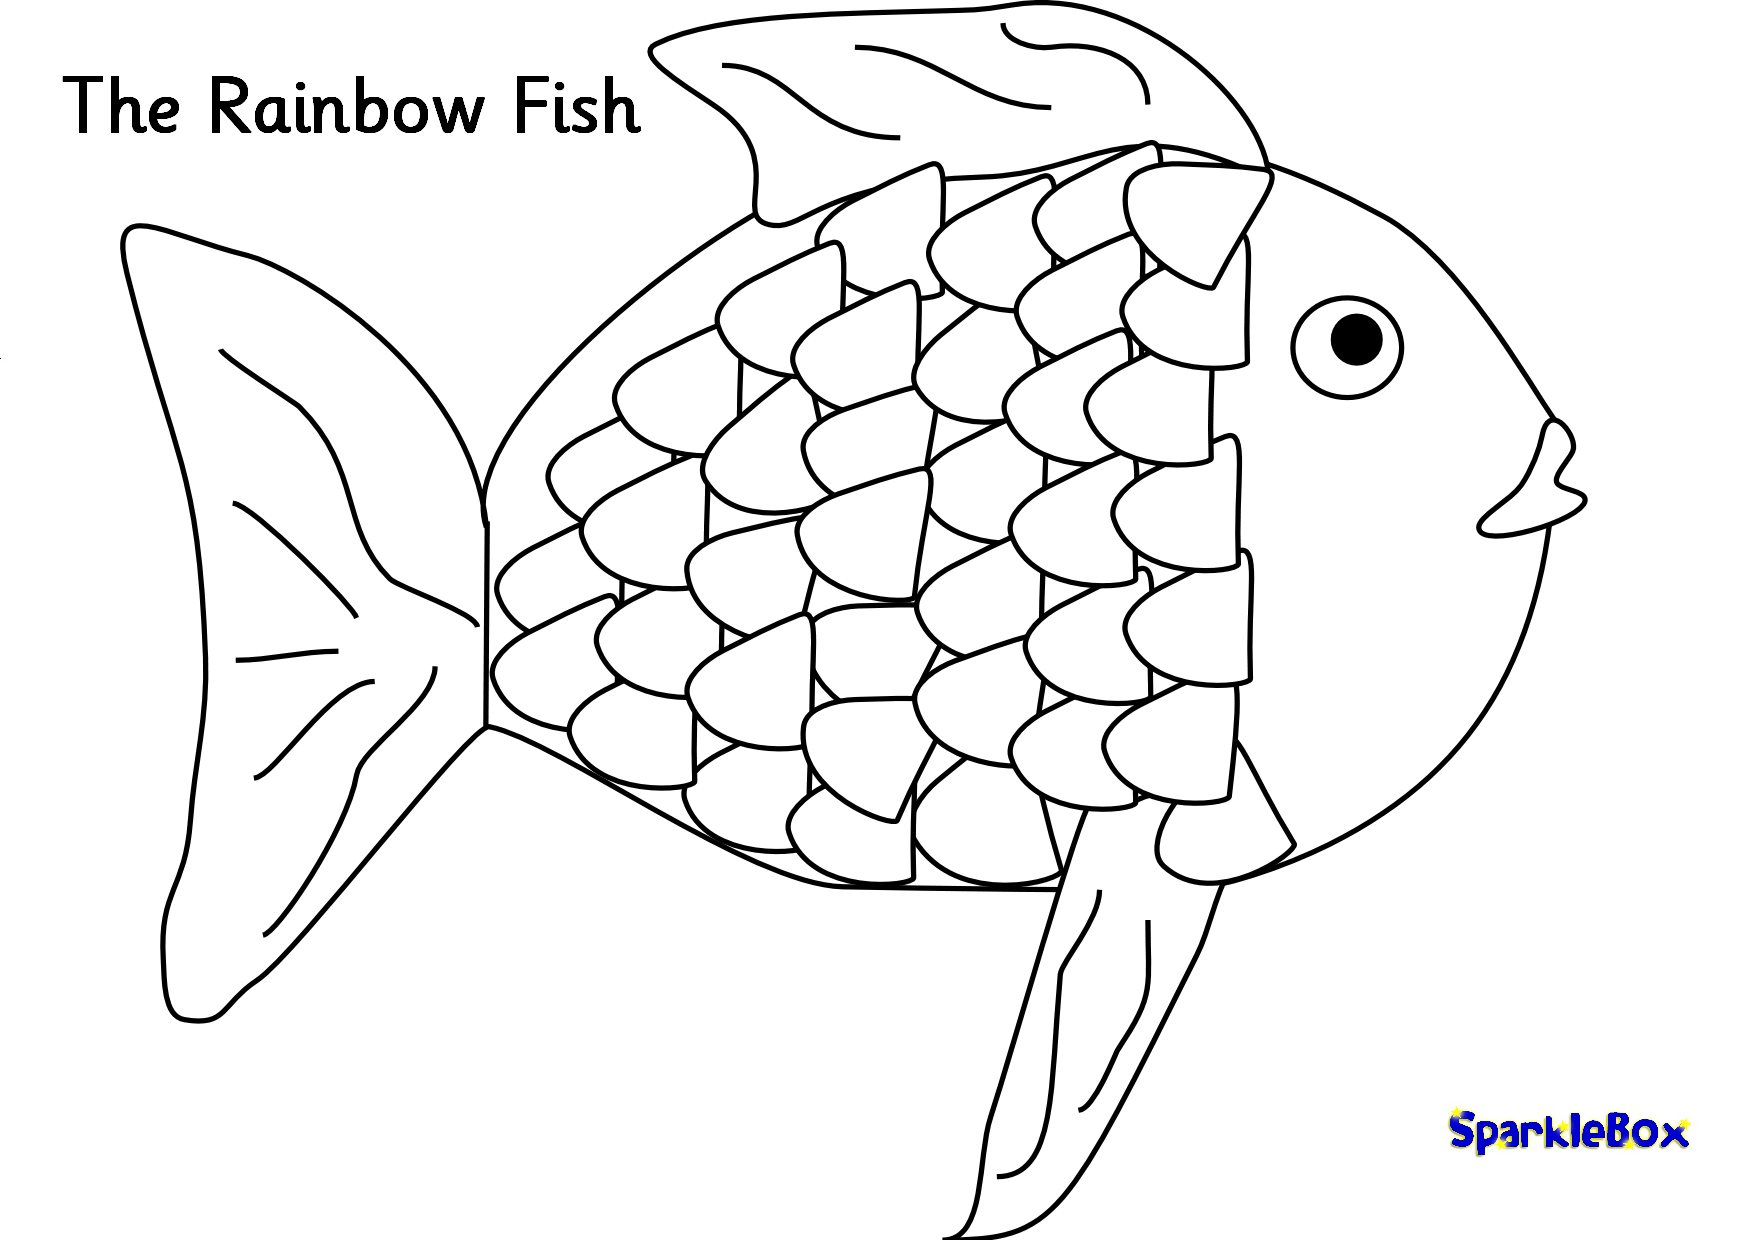 rainbow-fish-printable-coloring-page-printable-word-searches